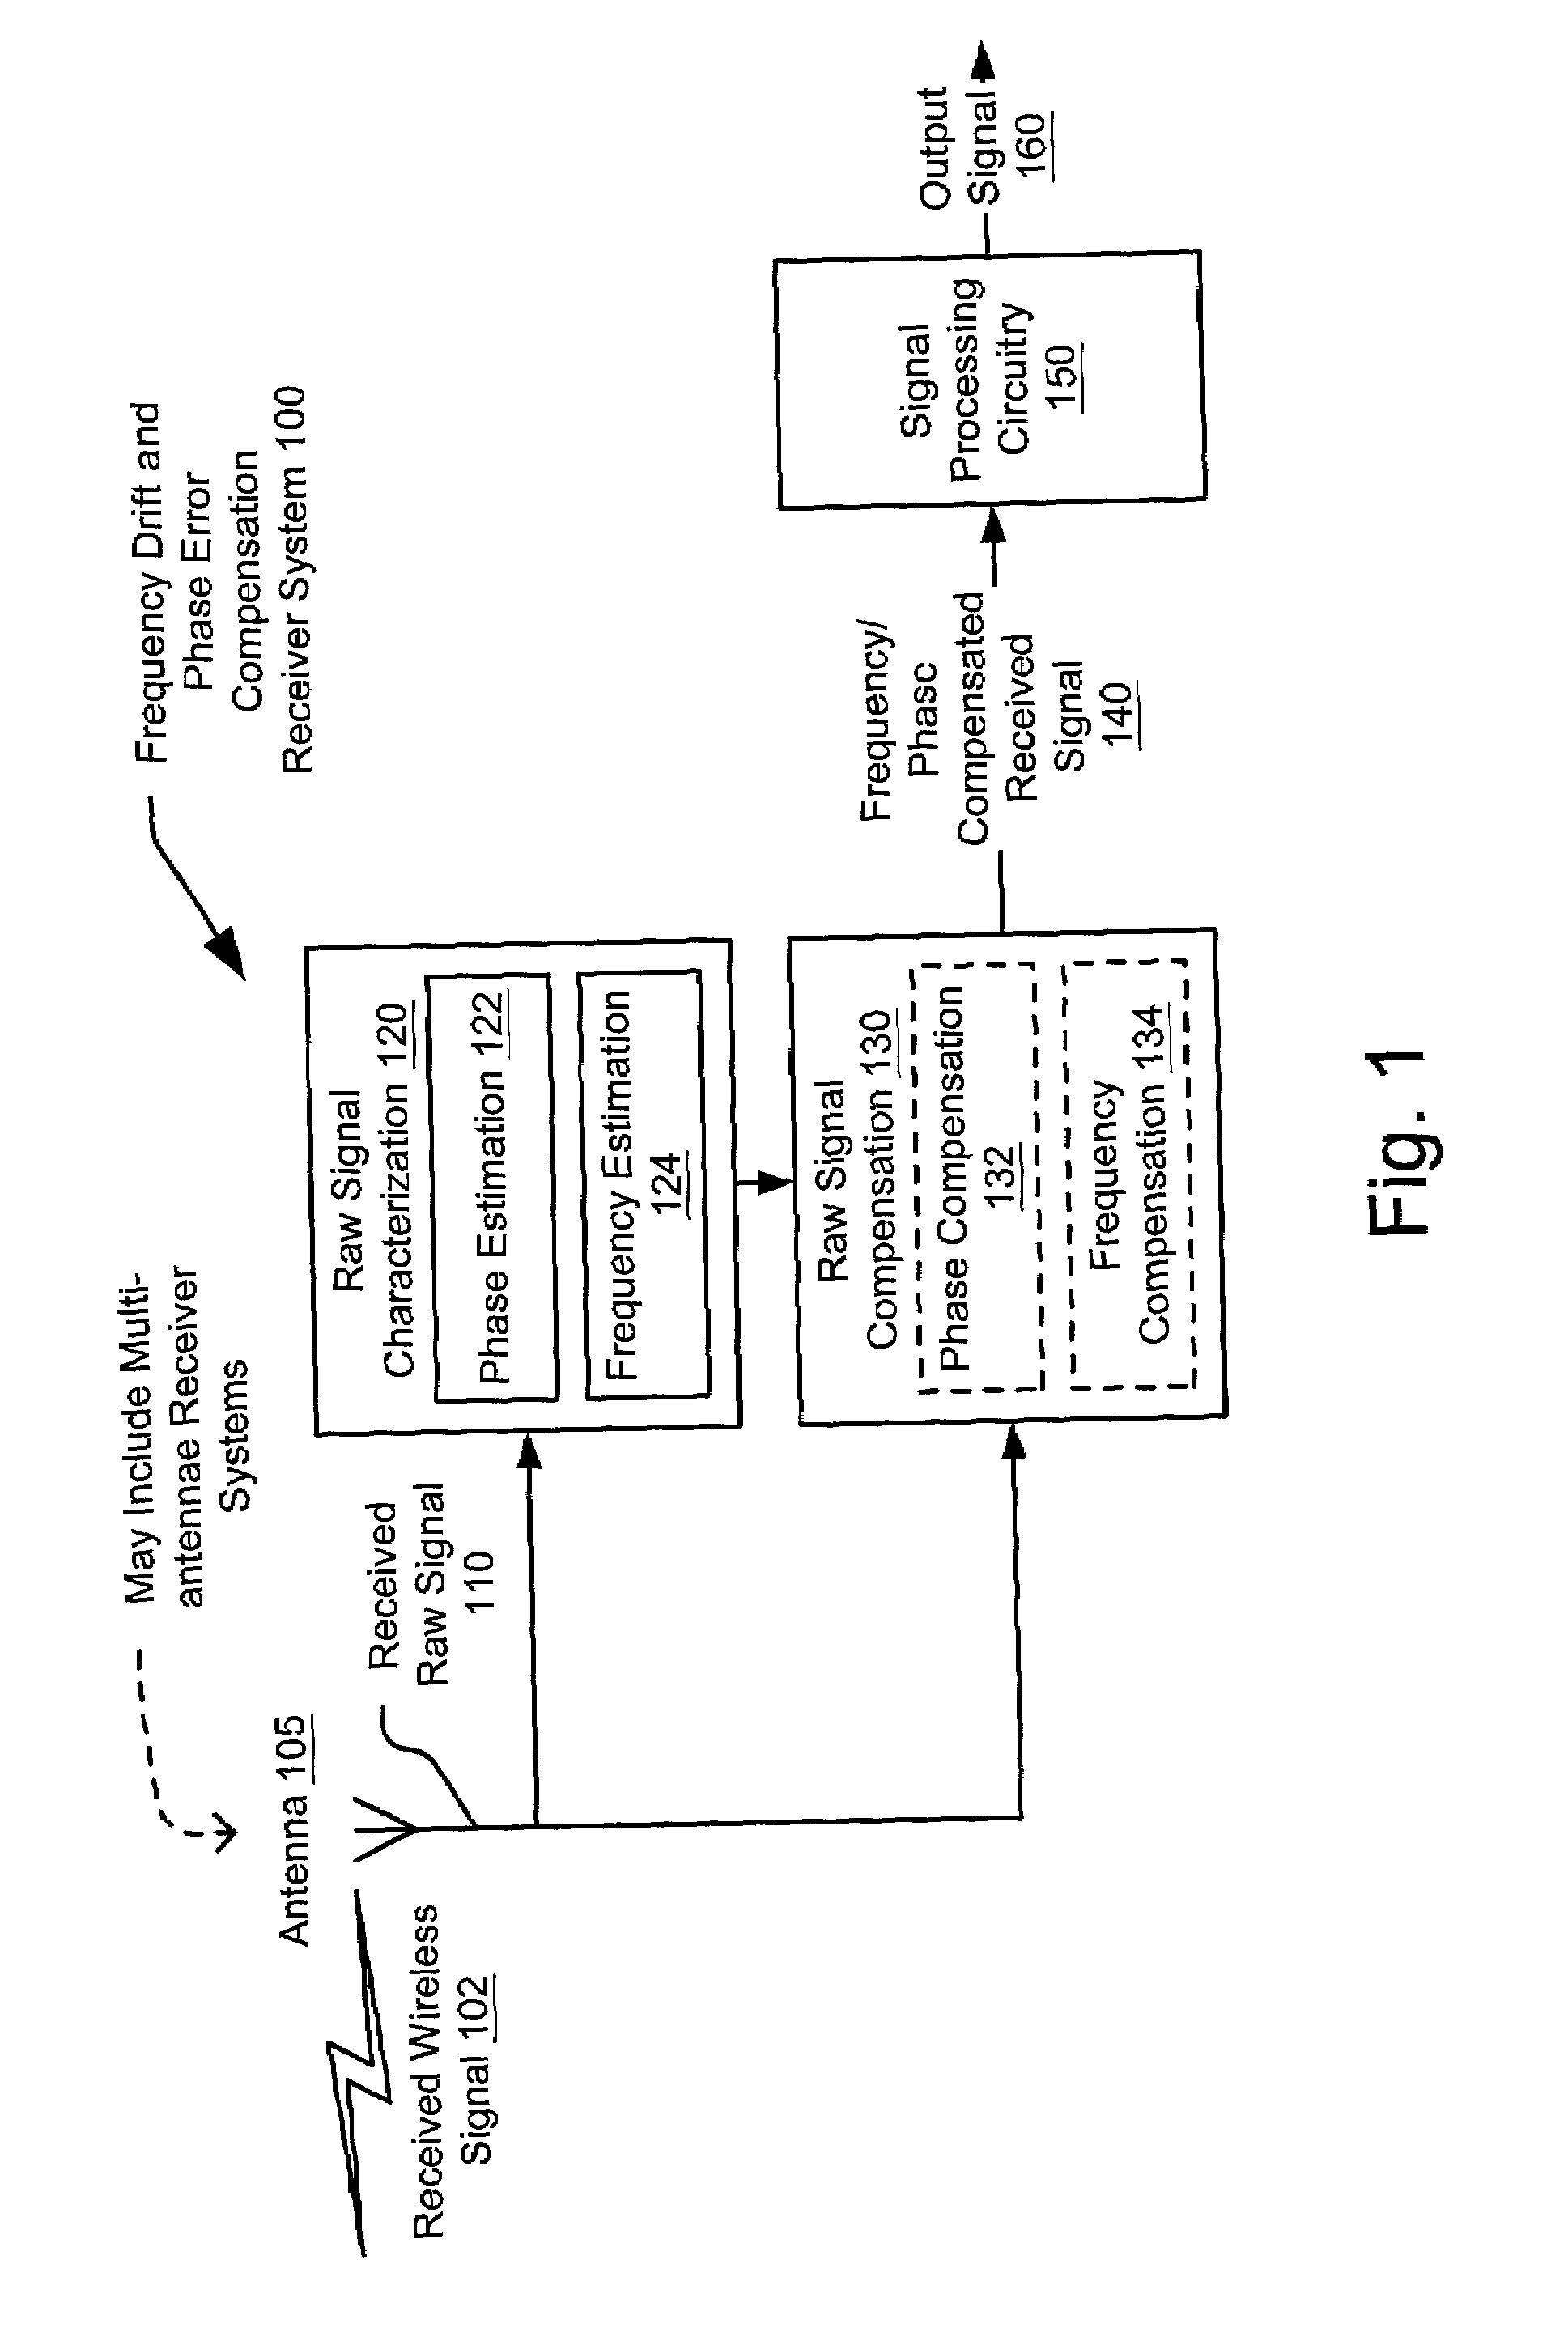 Frequency drift and phase error compensation in a VOFDM receiver